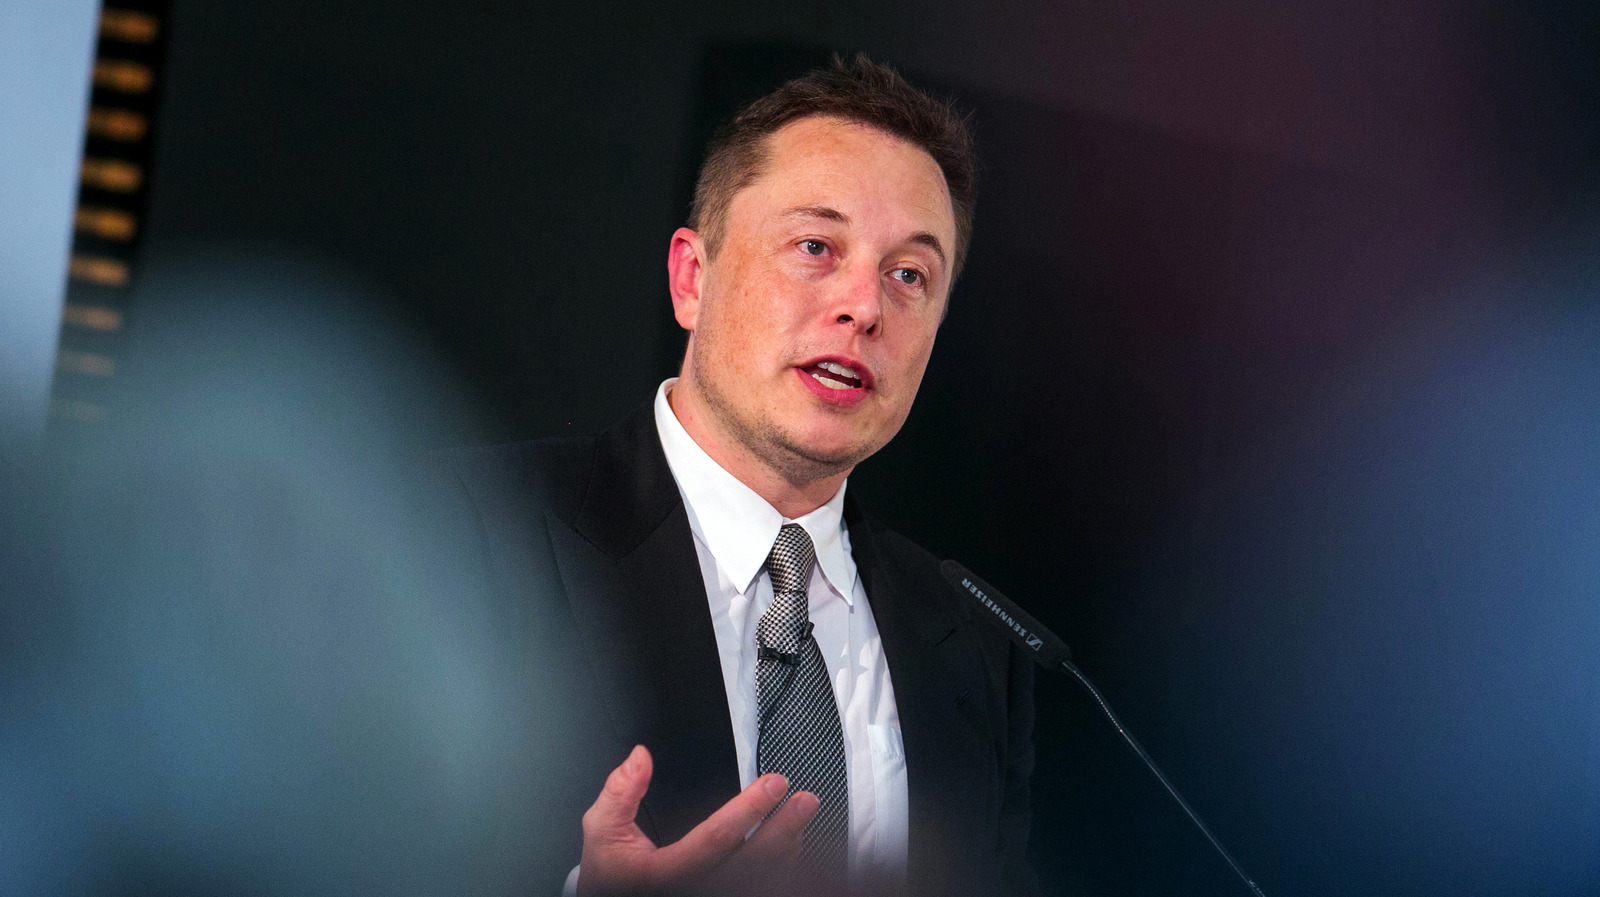 Elon Musk Lost The Title Of World's Richest Man, But Not For Long